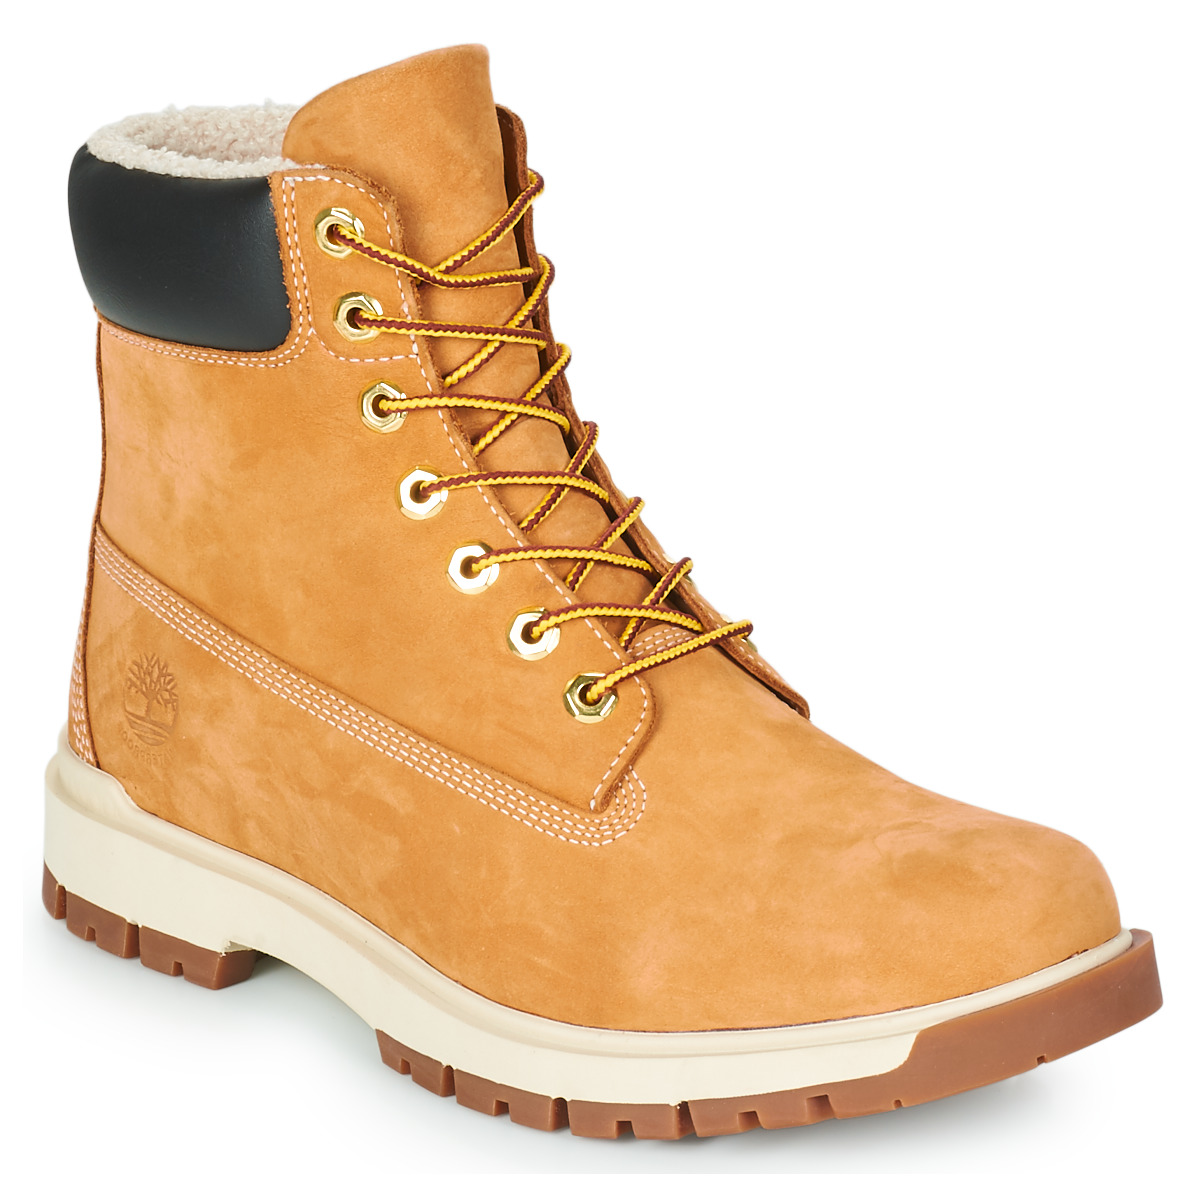 Chaussures Homme Boots Timberland TREE VAULT 6 INCH WL BOOT Blé